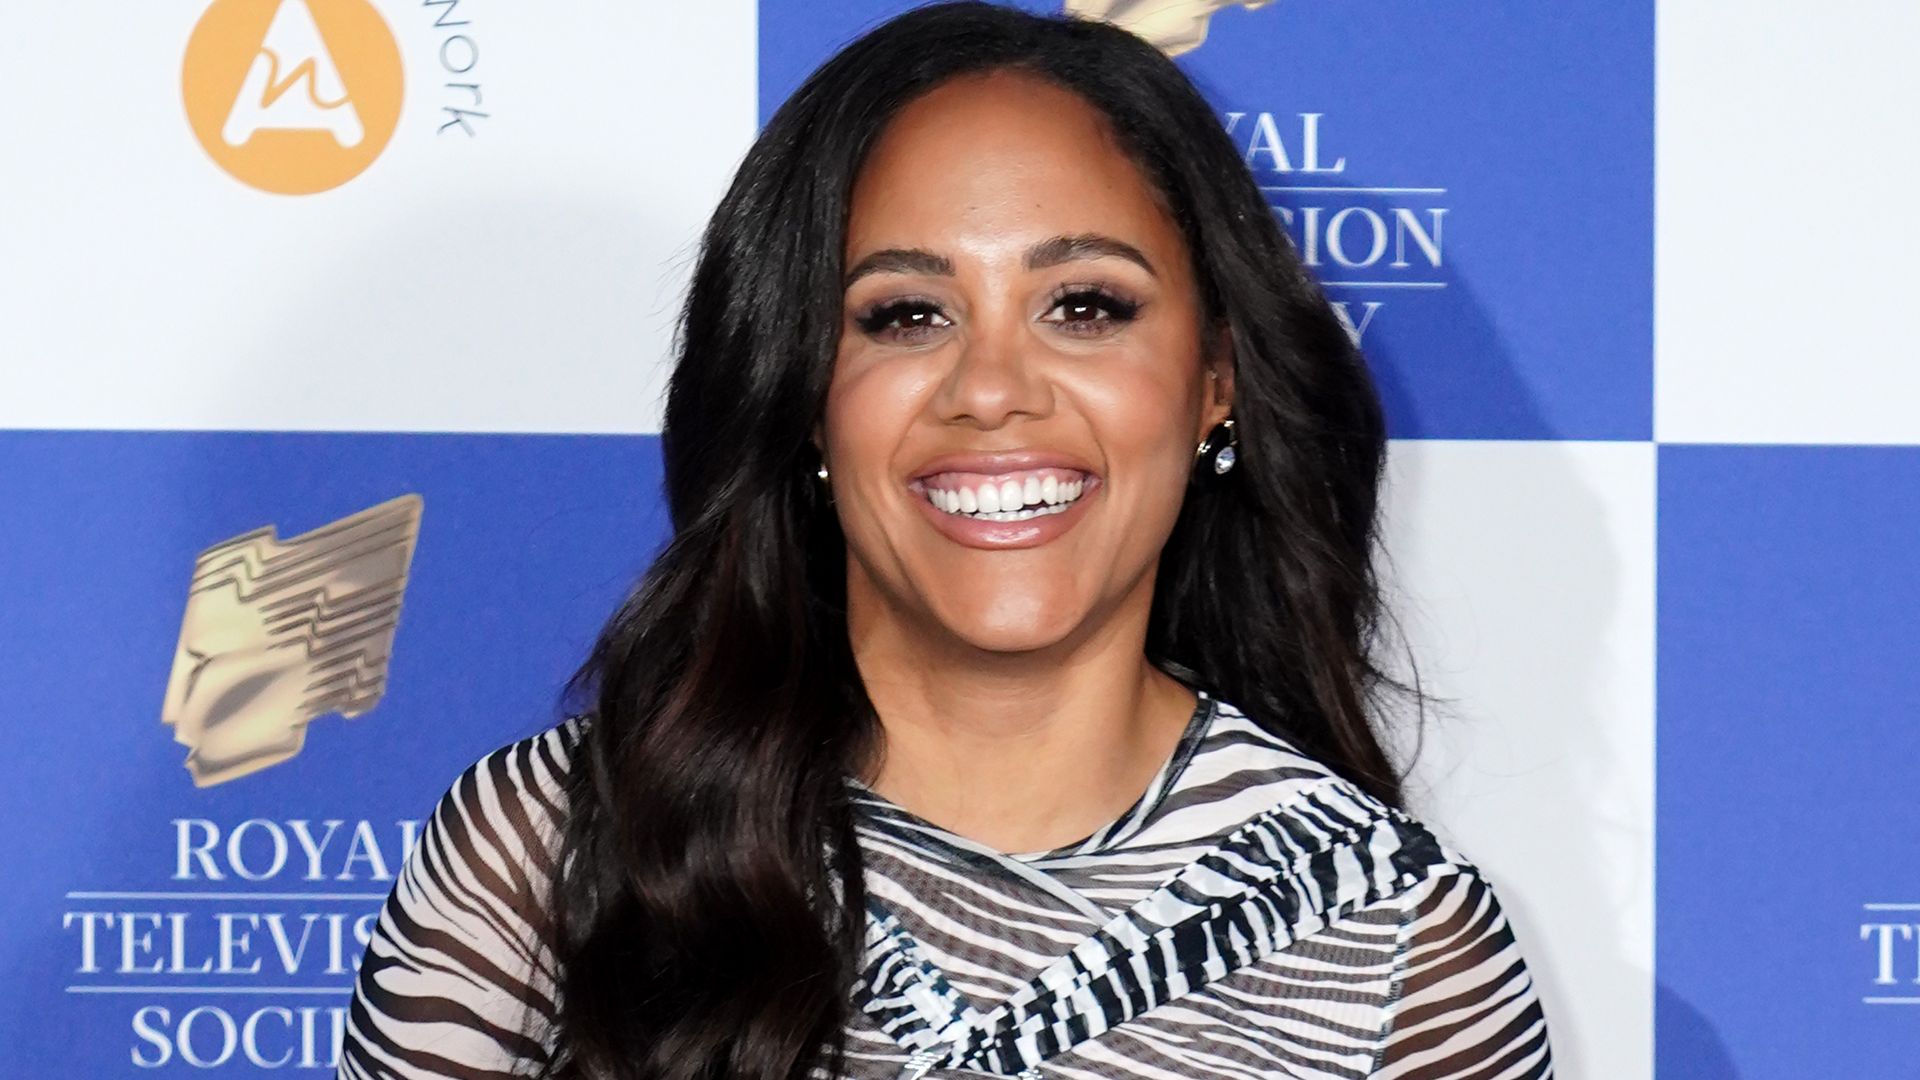 Alex Scott turns up the heat in sleeveless top and suit combo for smouldering pictures